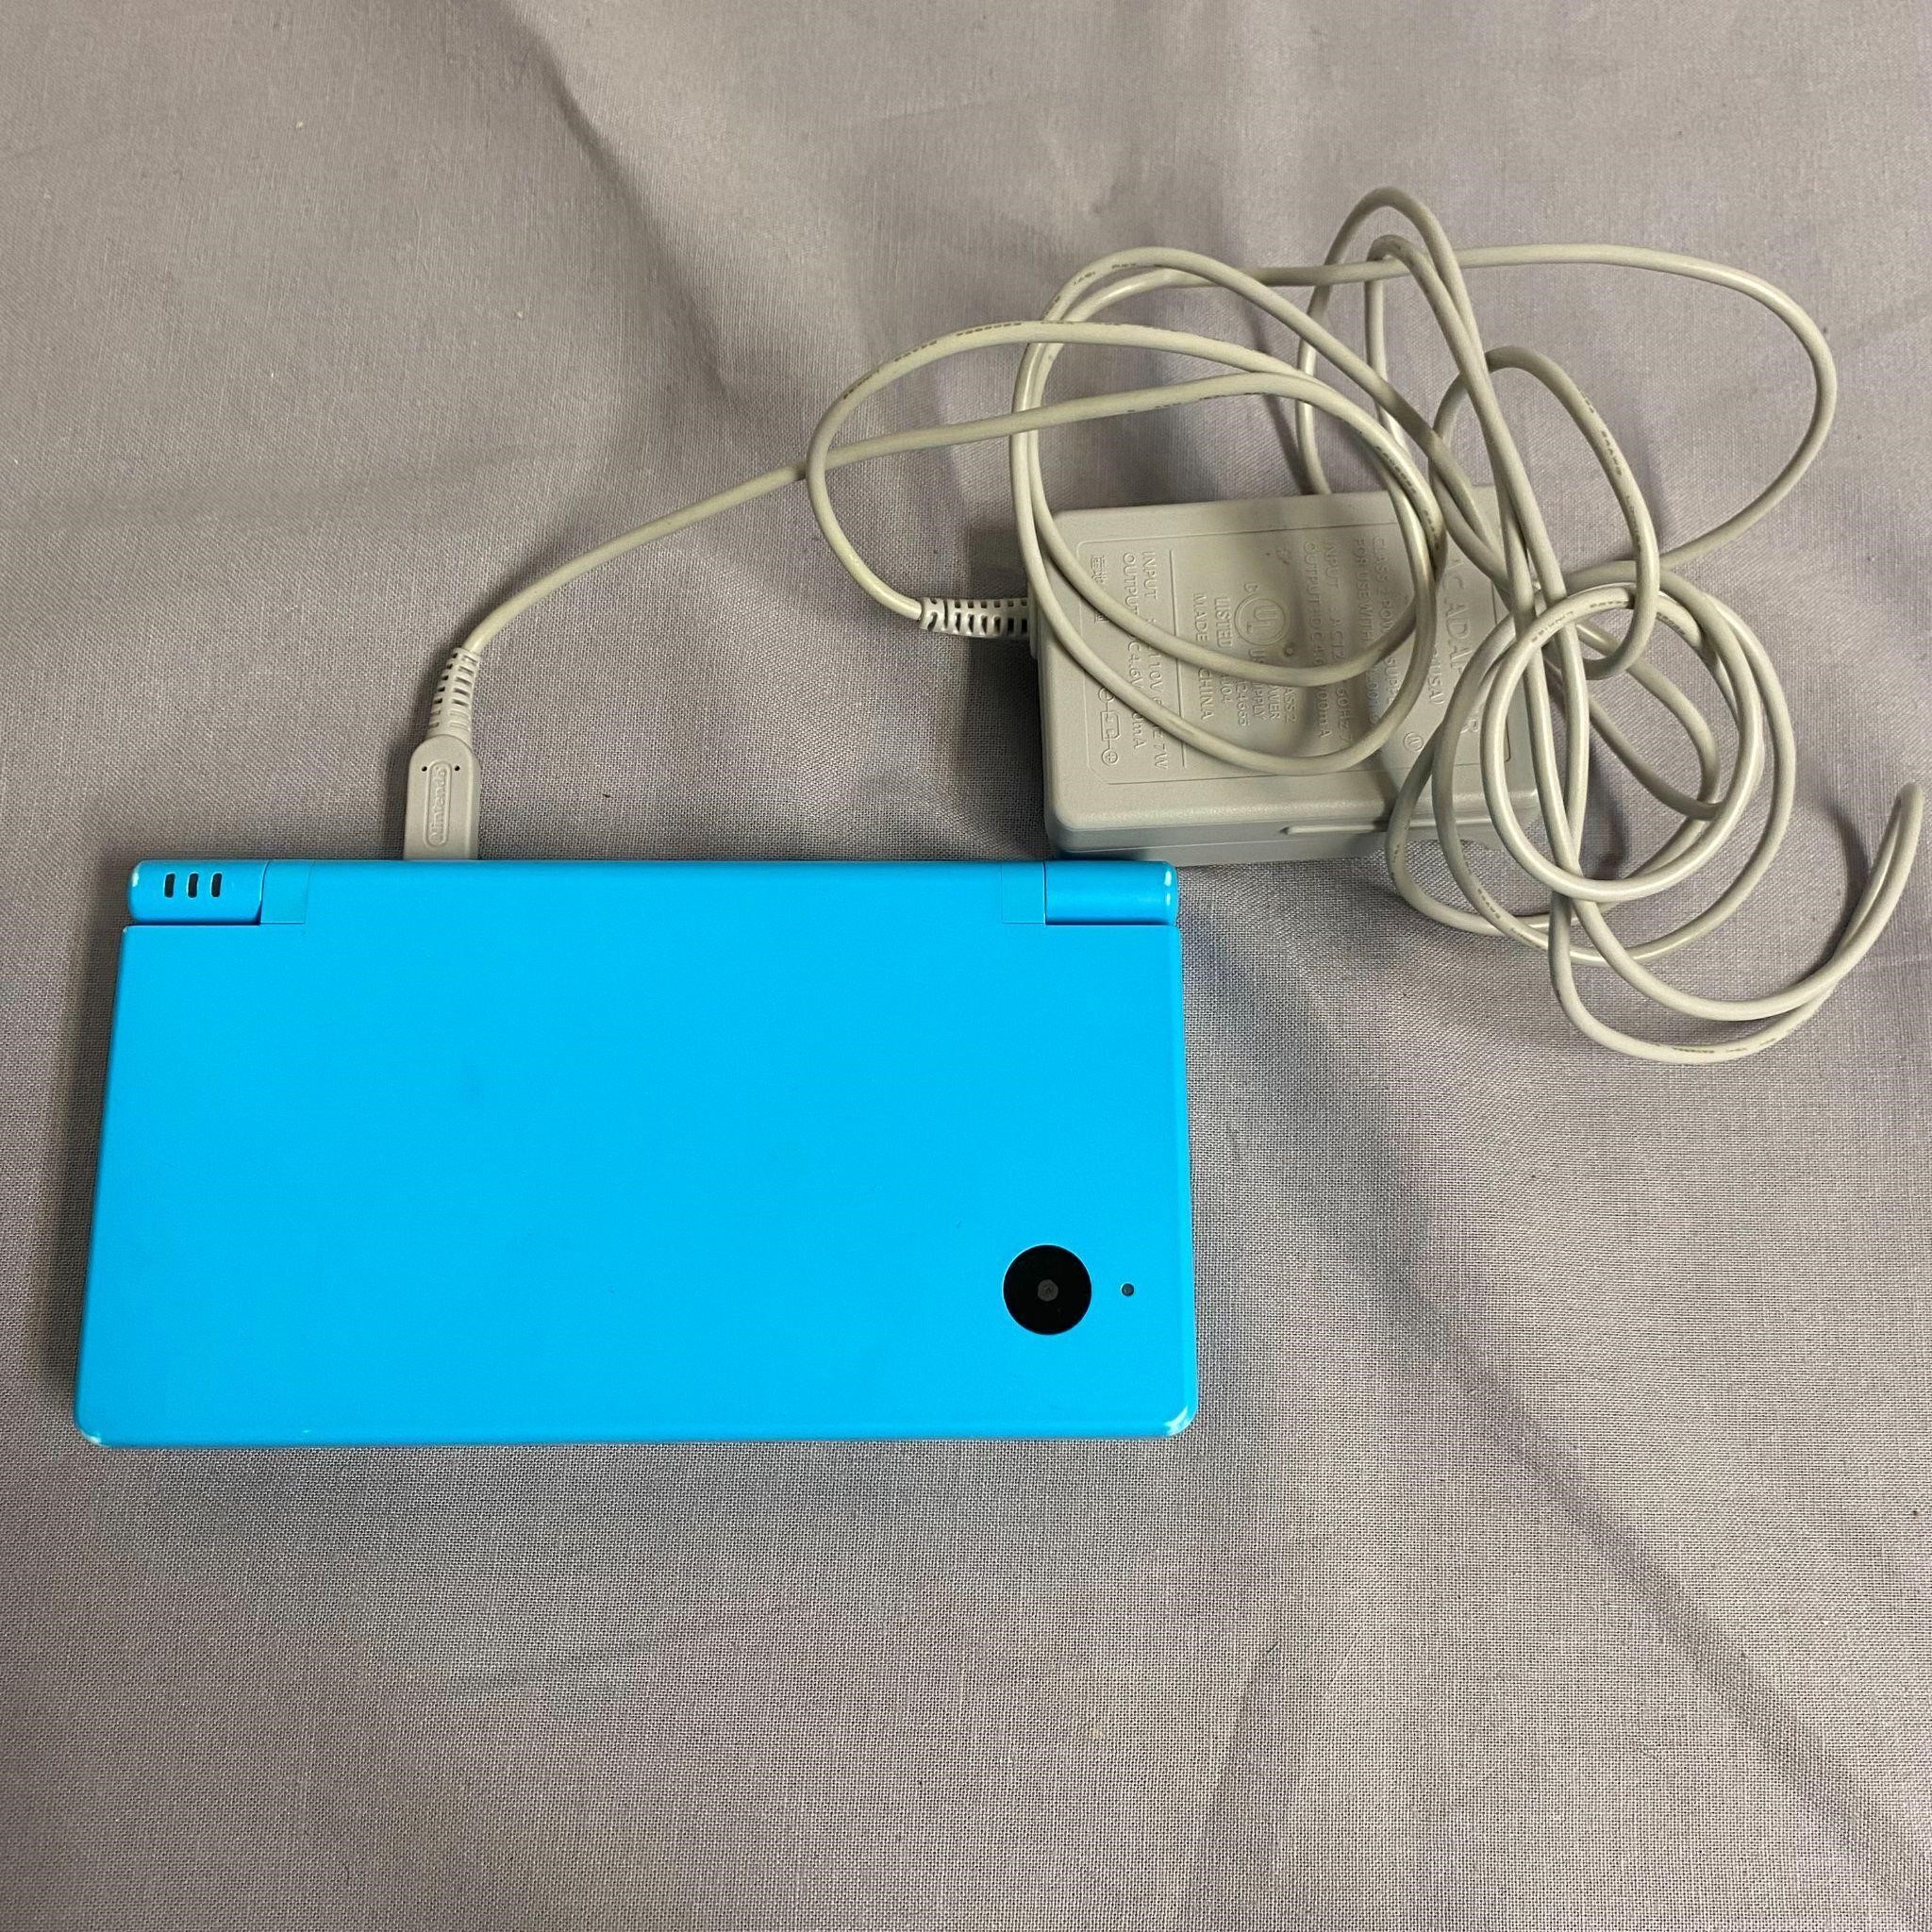 Nintendo DSi Handheld Console - Blue, w/ Charger